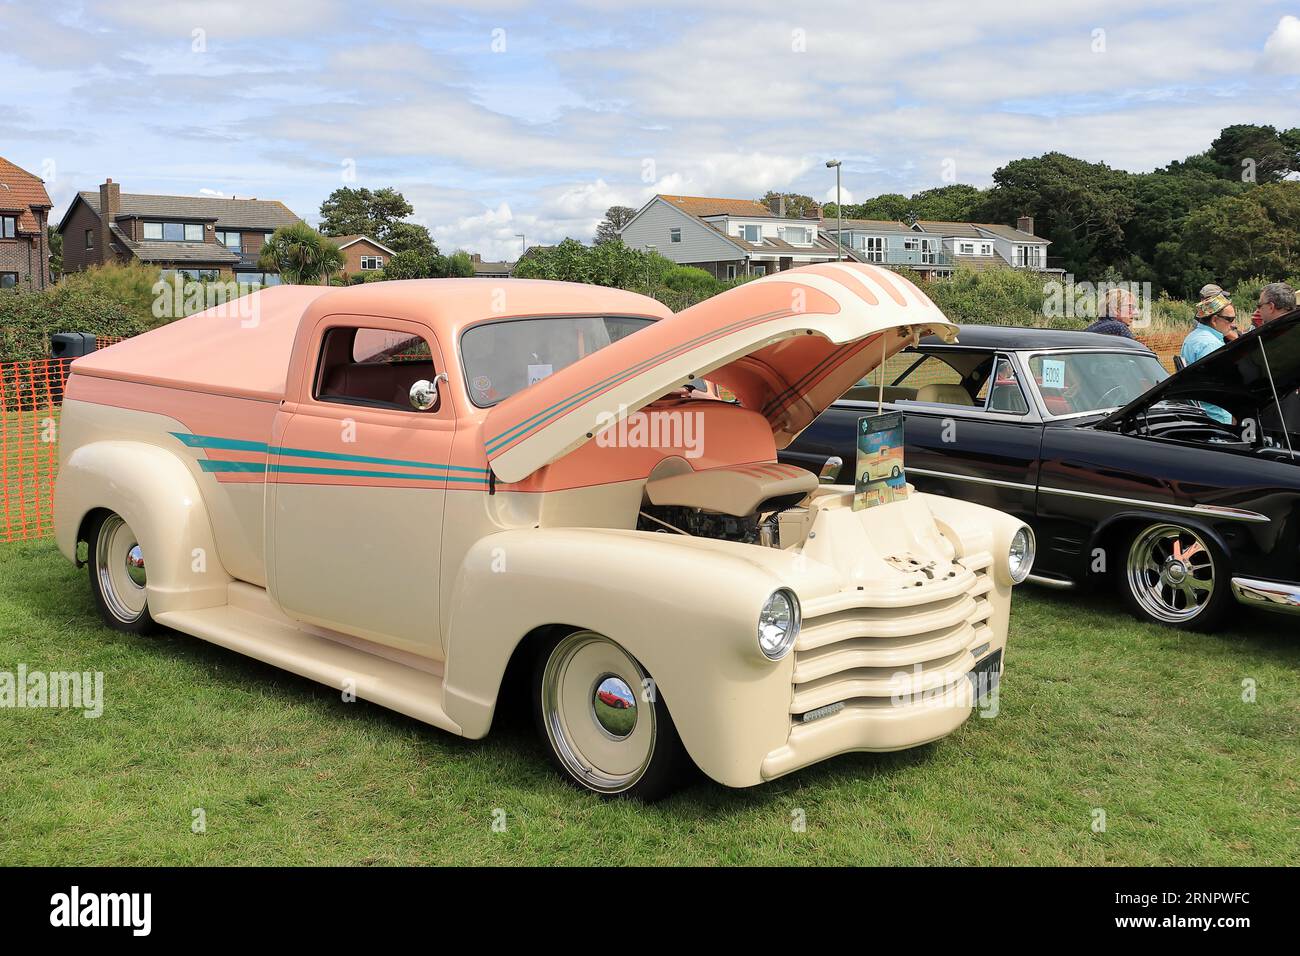 Peach 1940s Chevrolet 3100 truck on display. The Gosport Car Rally is organised by the local Rotary Club and takes place at Stokes Bay on the August bank holiday Monday. This year's event, providing a cheap family day out, was the seventieth and hosted vintage cars and motorbikes, a petting farm, stalls, refreshments and an arena which provided various forms of entertainment. Stock Photo